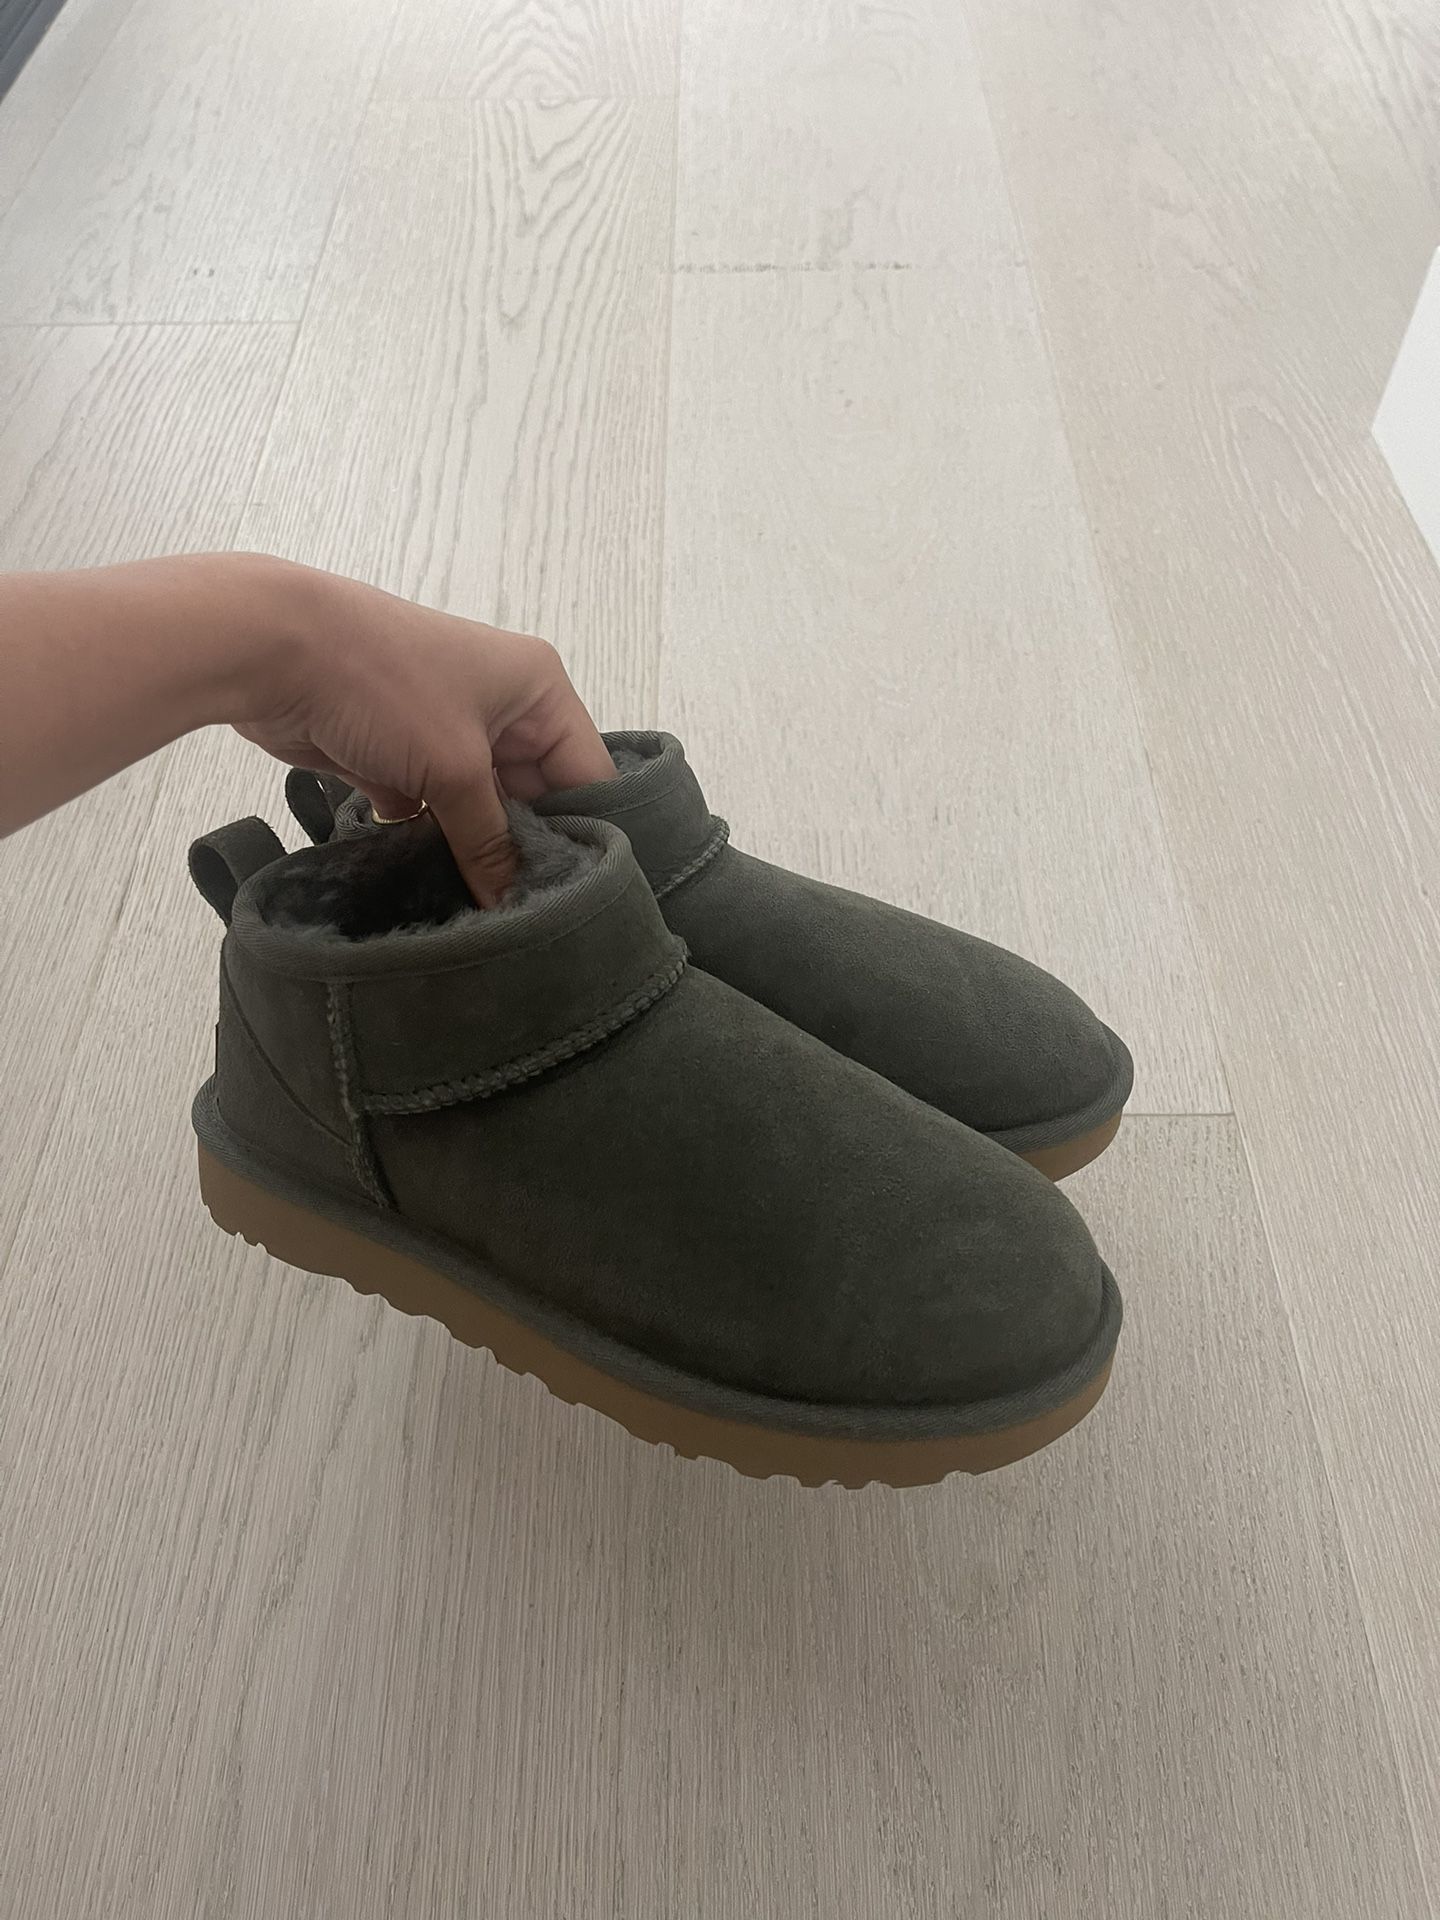 UGG plush Size 6 In Color Green 